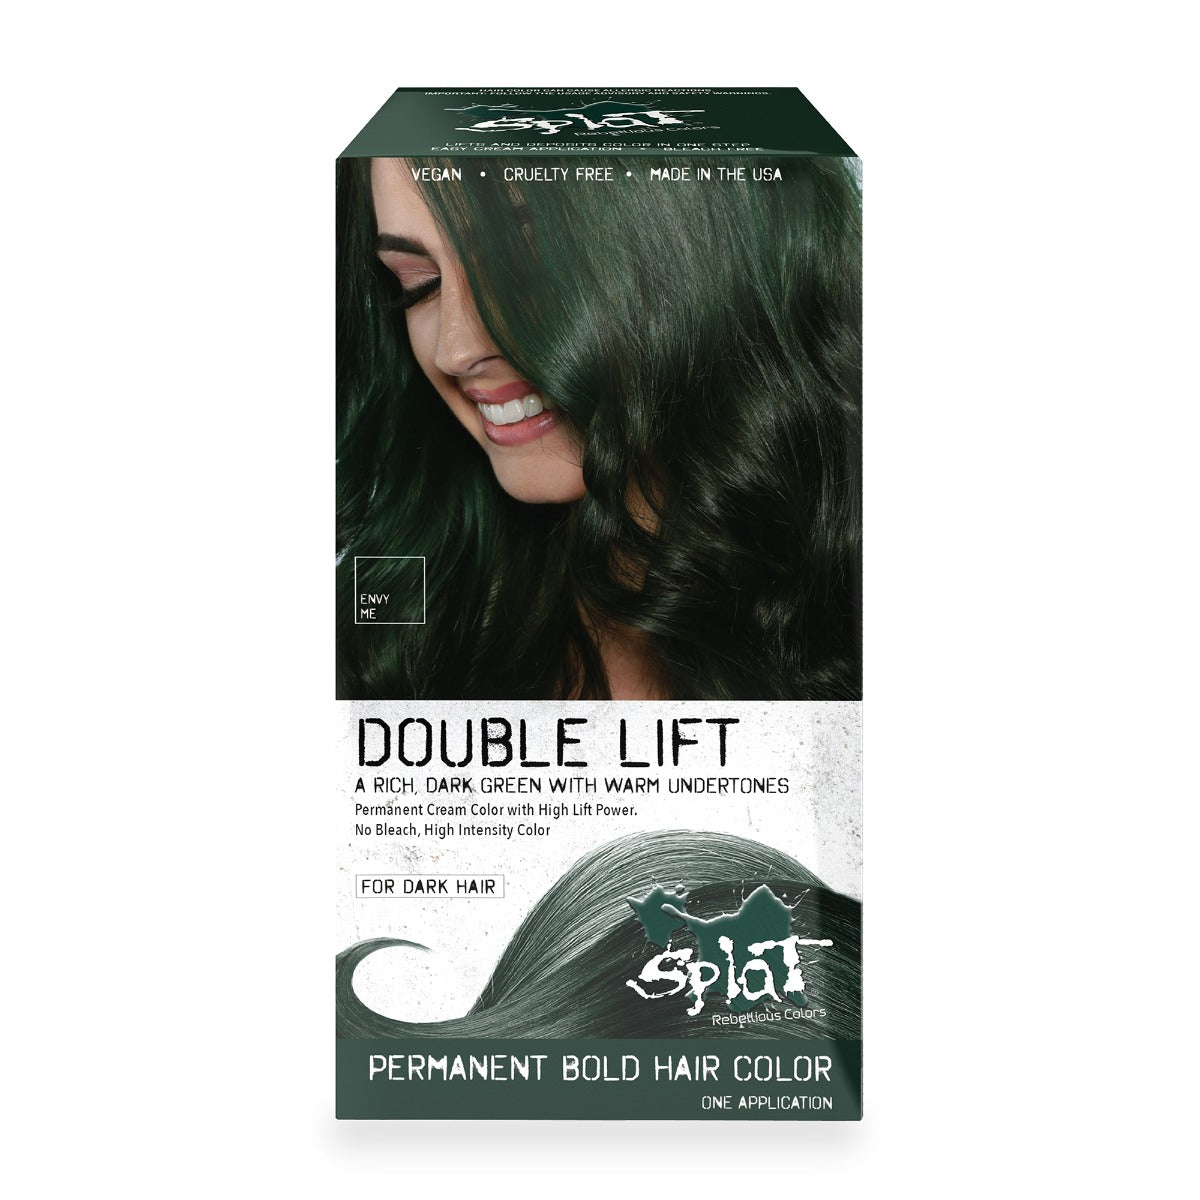 Splat Permanent Hair Color in Green- Envy Me Double Lift